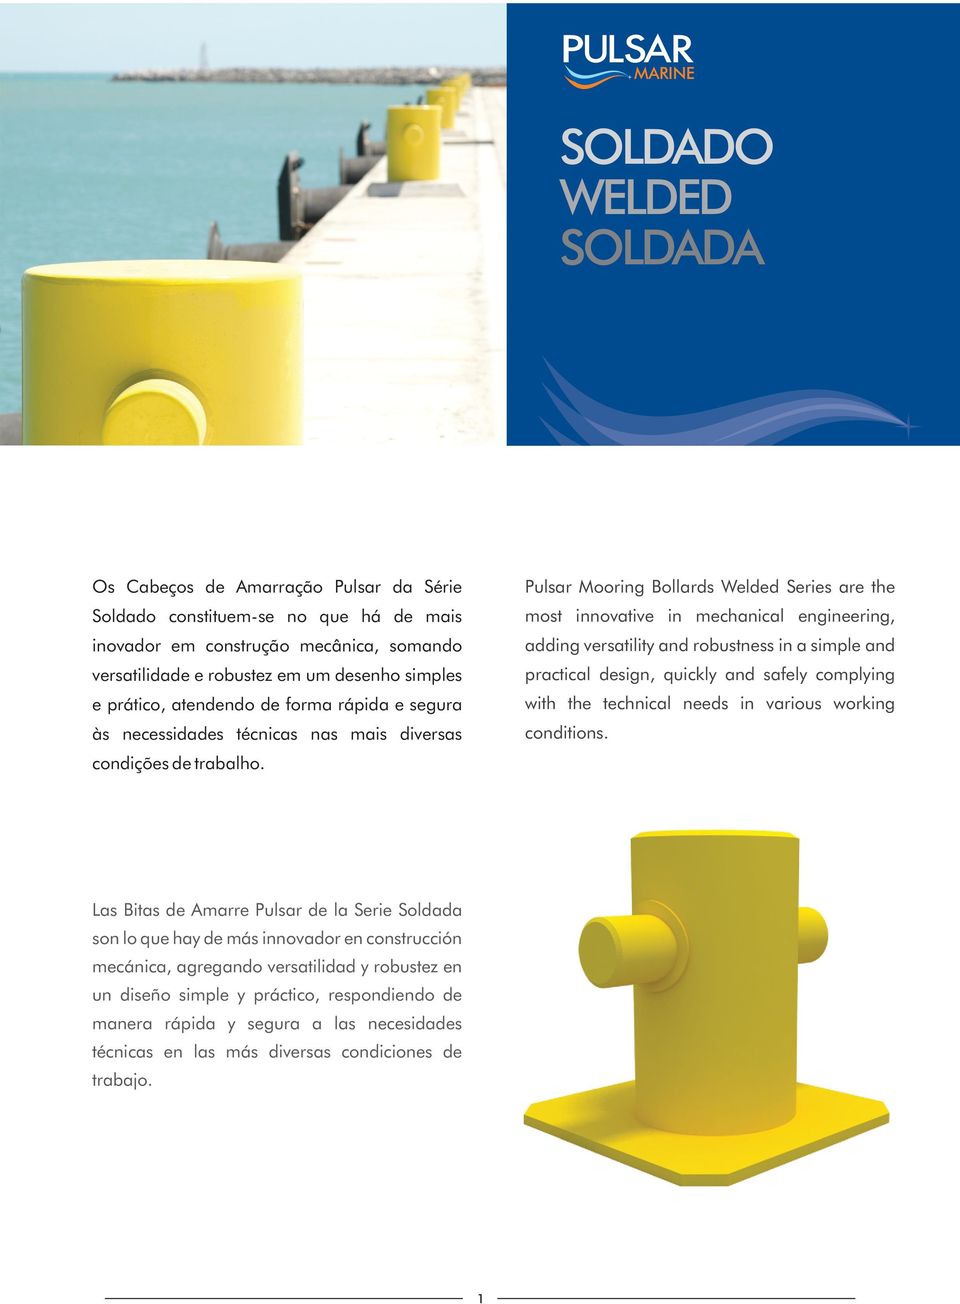 Pulsar Mooring Bollards Welded Series are the most innovative in mechanical engineering, adding versatility and robustness in a simple and practical design, quickly and safely complying with the